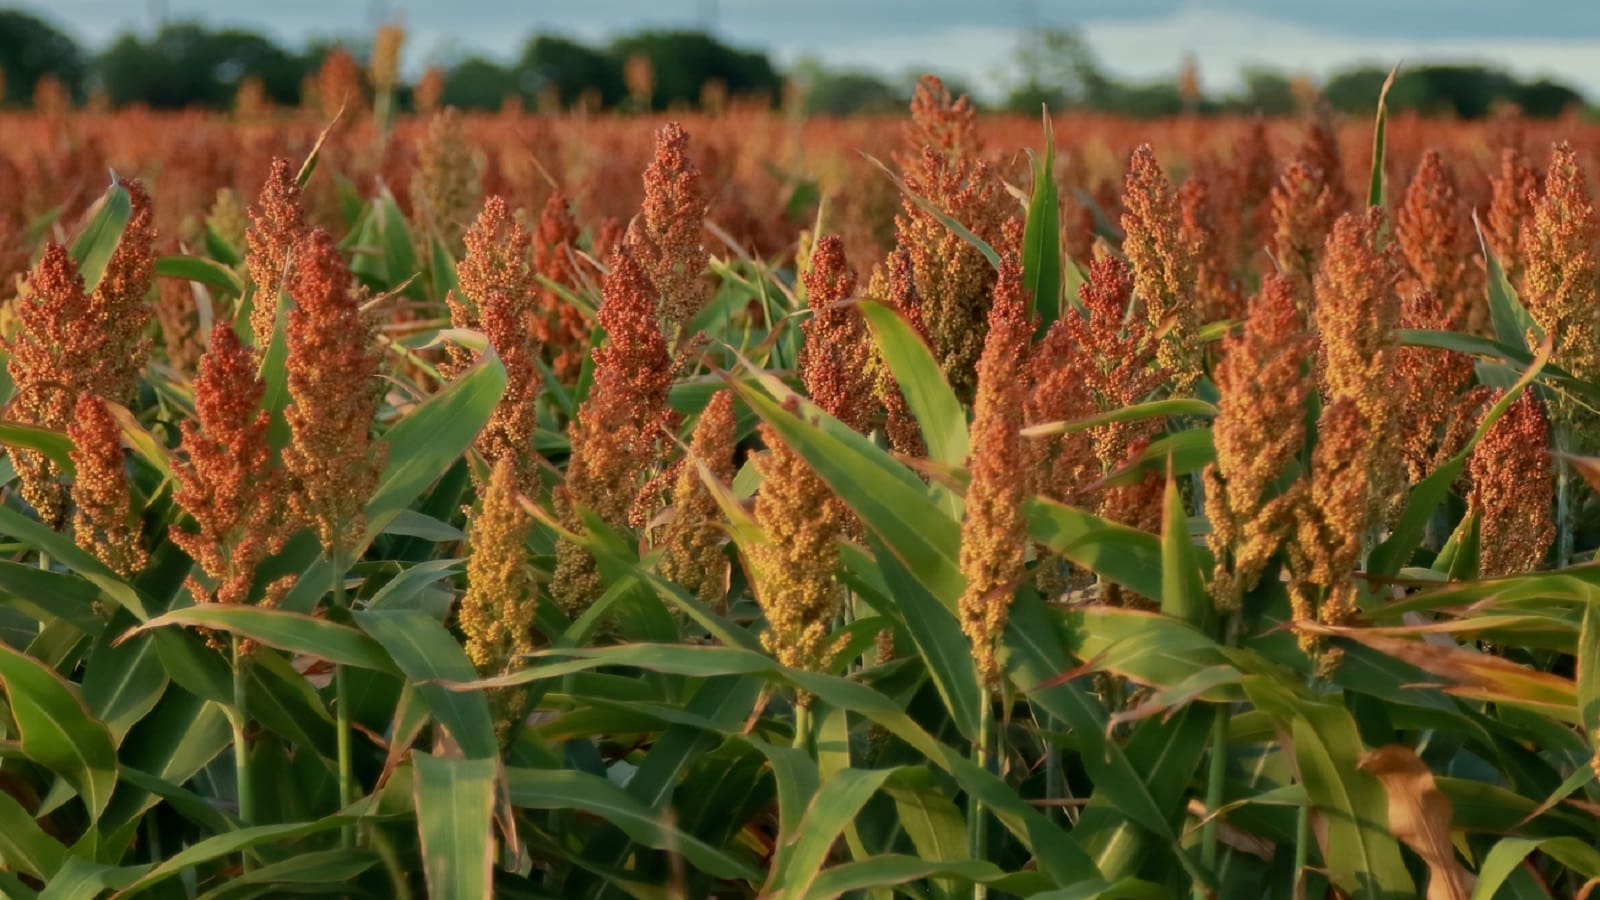 Wheat genes enhance sorghum growth, paving the way for sustainable biomass solutions